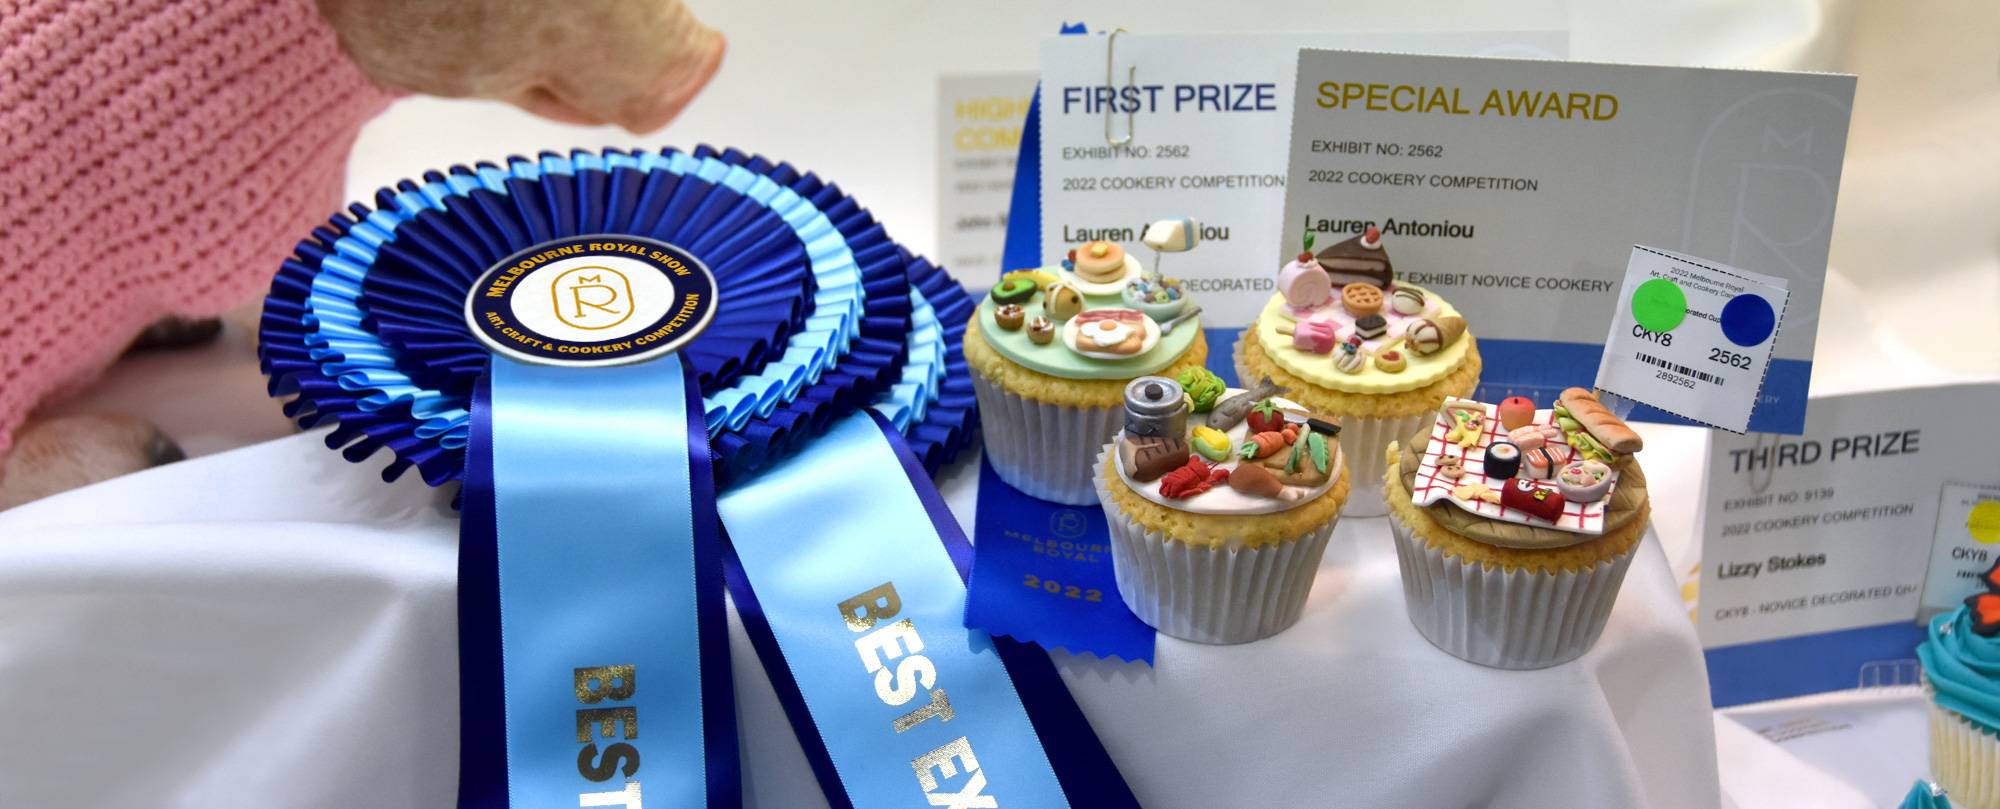 Rosettes for agricultural shows.